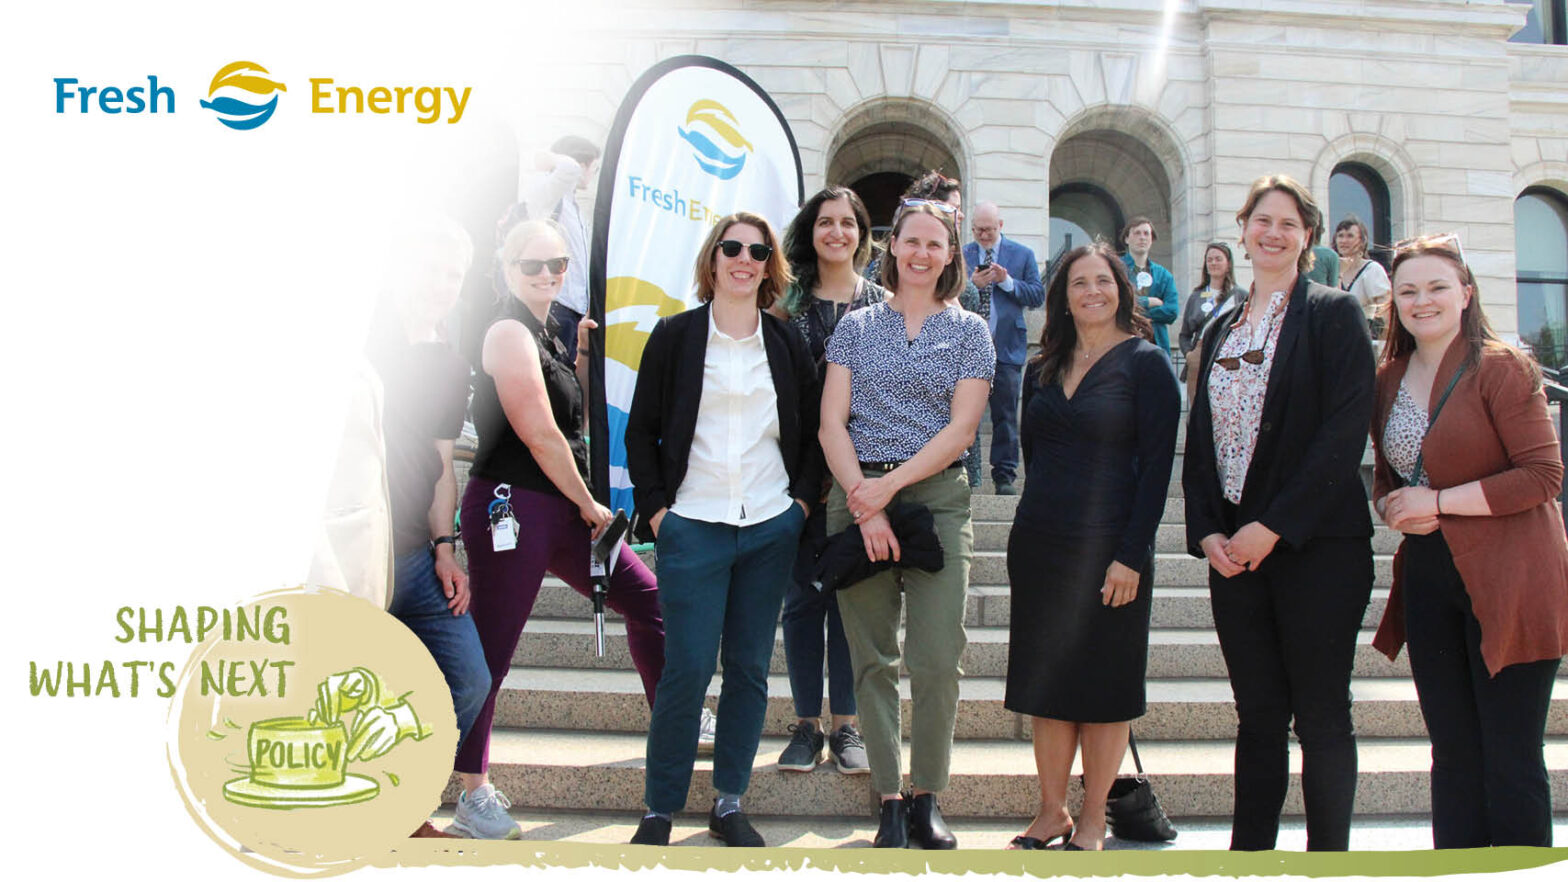 Fresh Energy Staff standing on the steps of the Capital. Text" Shaping What's Next